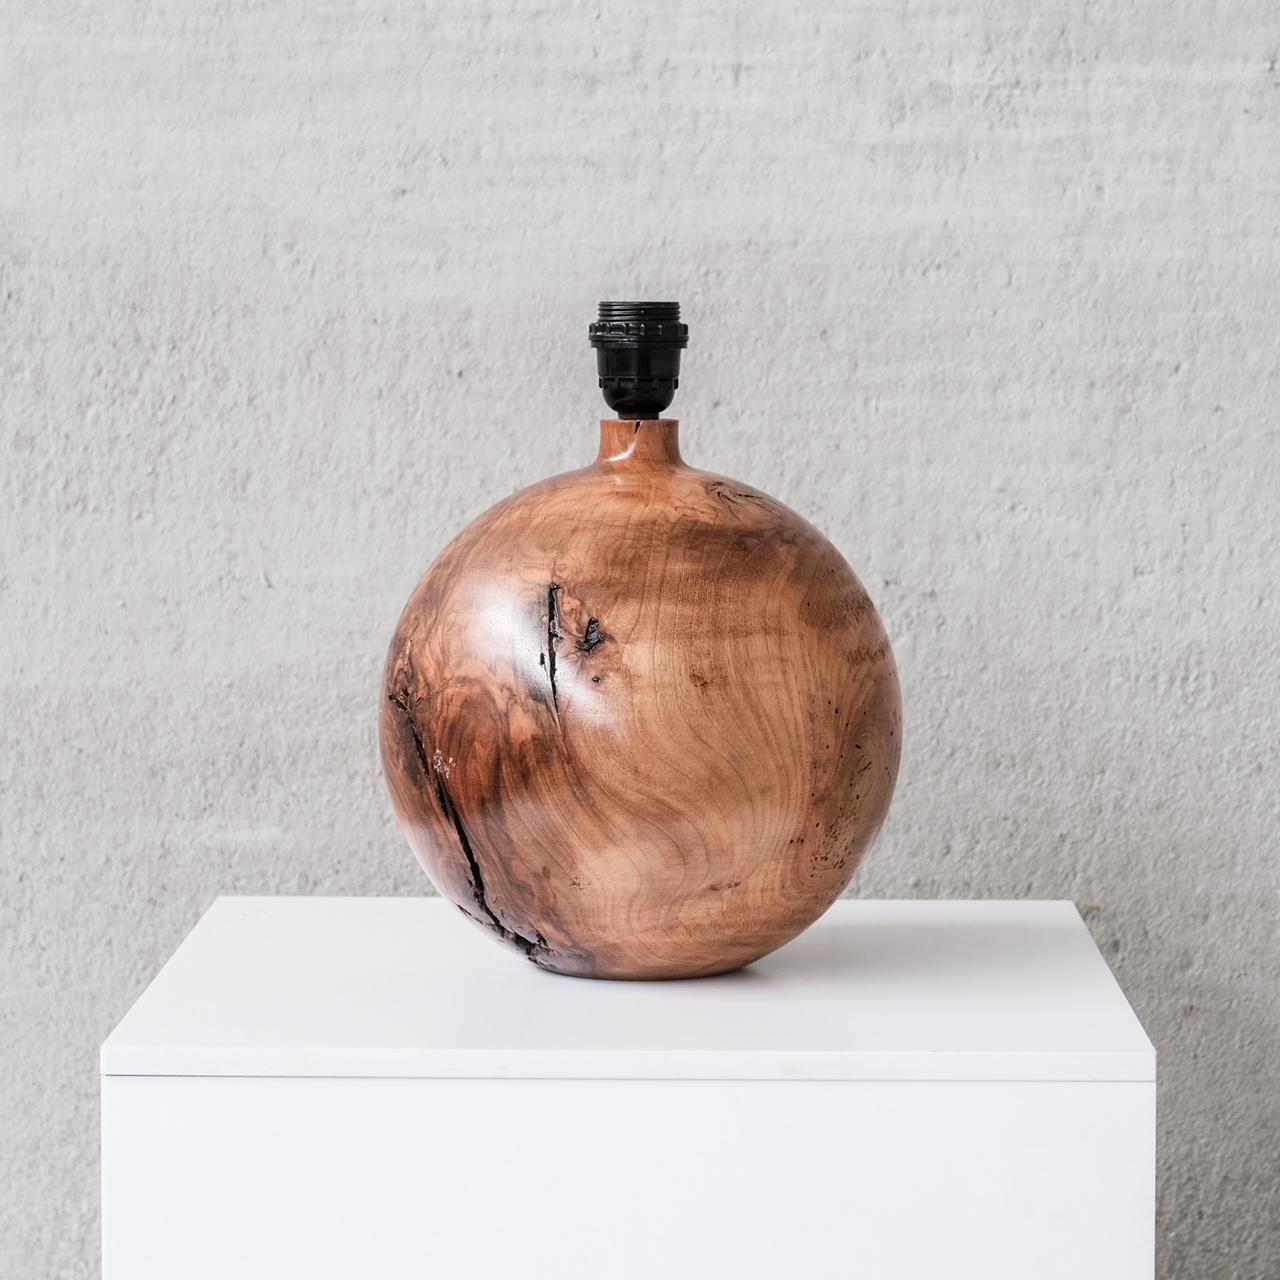 A chunky spherical wooden table lamp. 

France, c1950s. 

Wabi sabi style esque, celebration of wood and its imperfections. 

Good vintage condition.

Since re-wired and PAT tested. 

Location: Belgium Gallery.

Dimensions: 32 H x 27